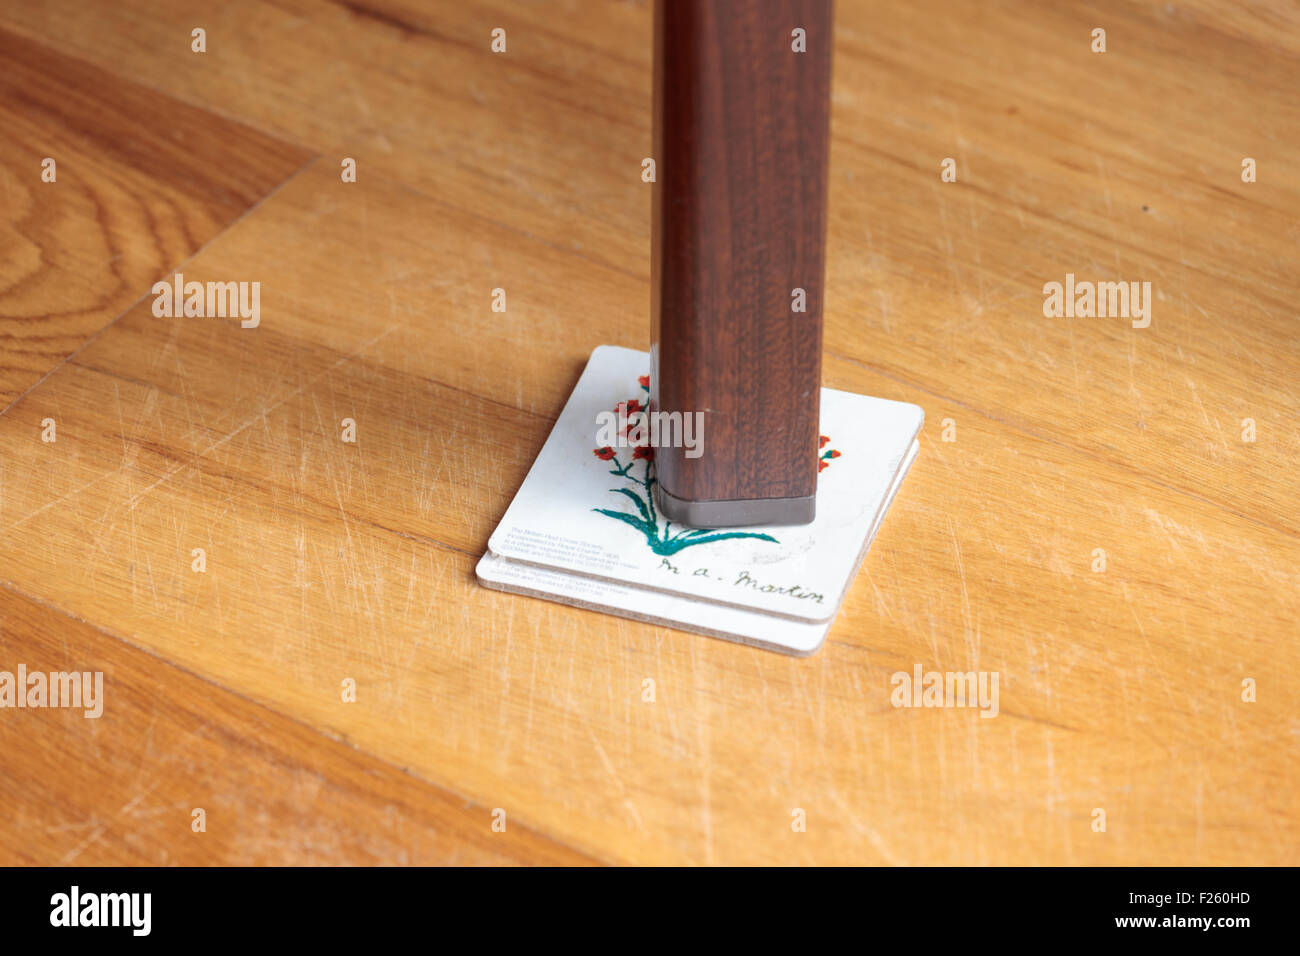 Leg of a wobbly table supported by coasters Stock Photo